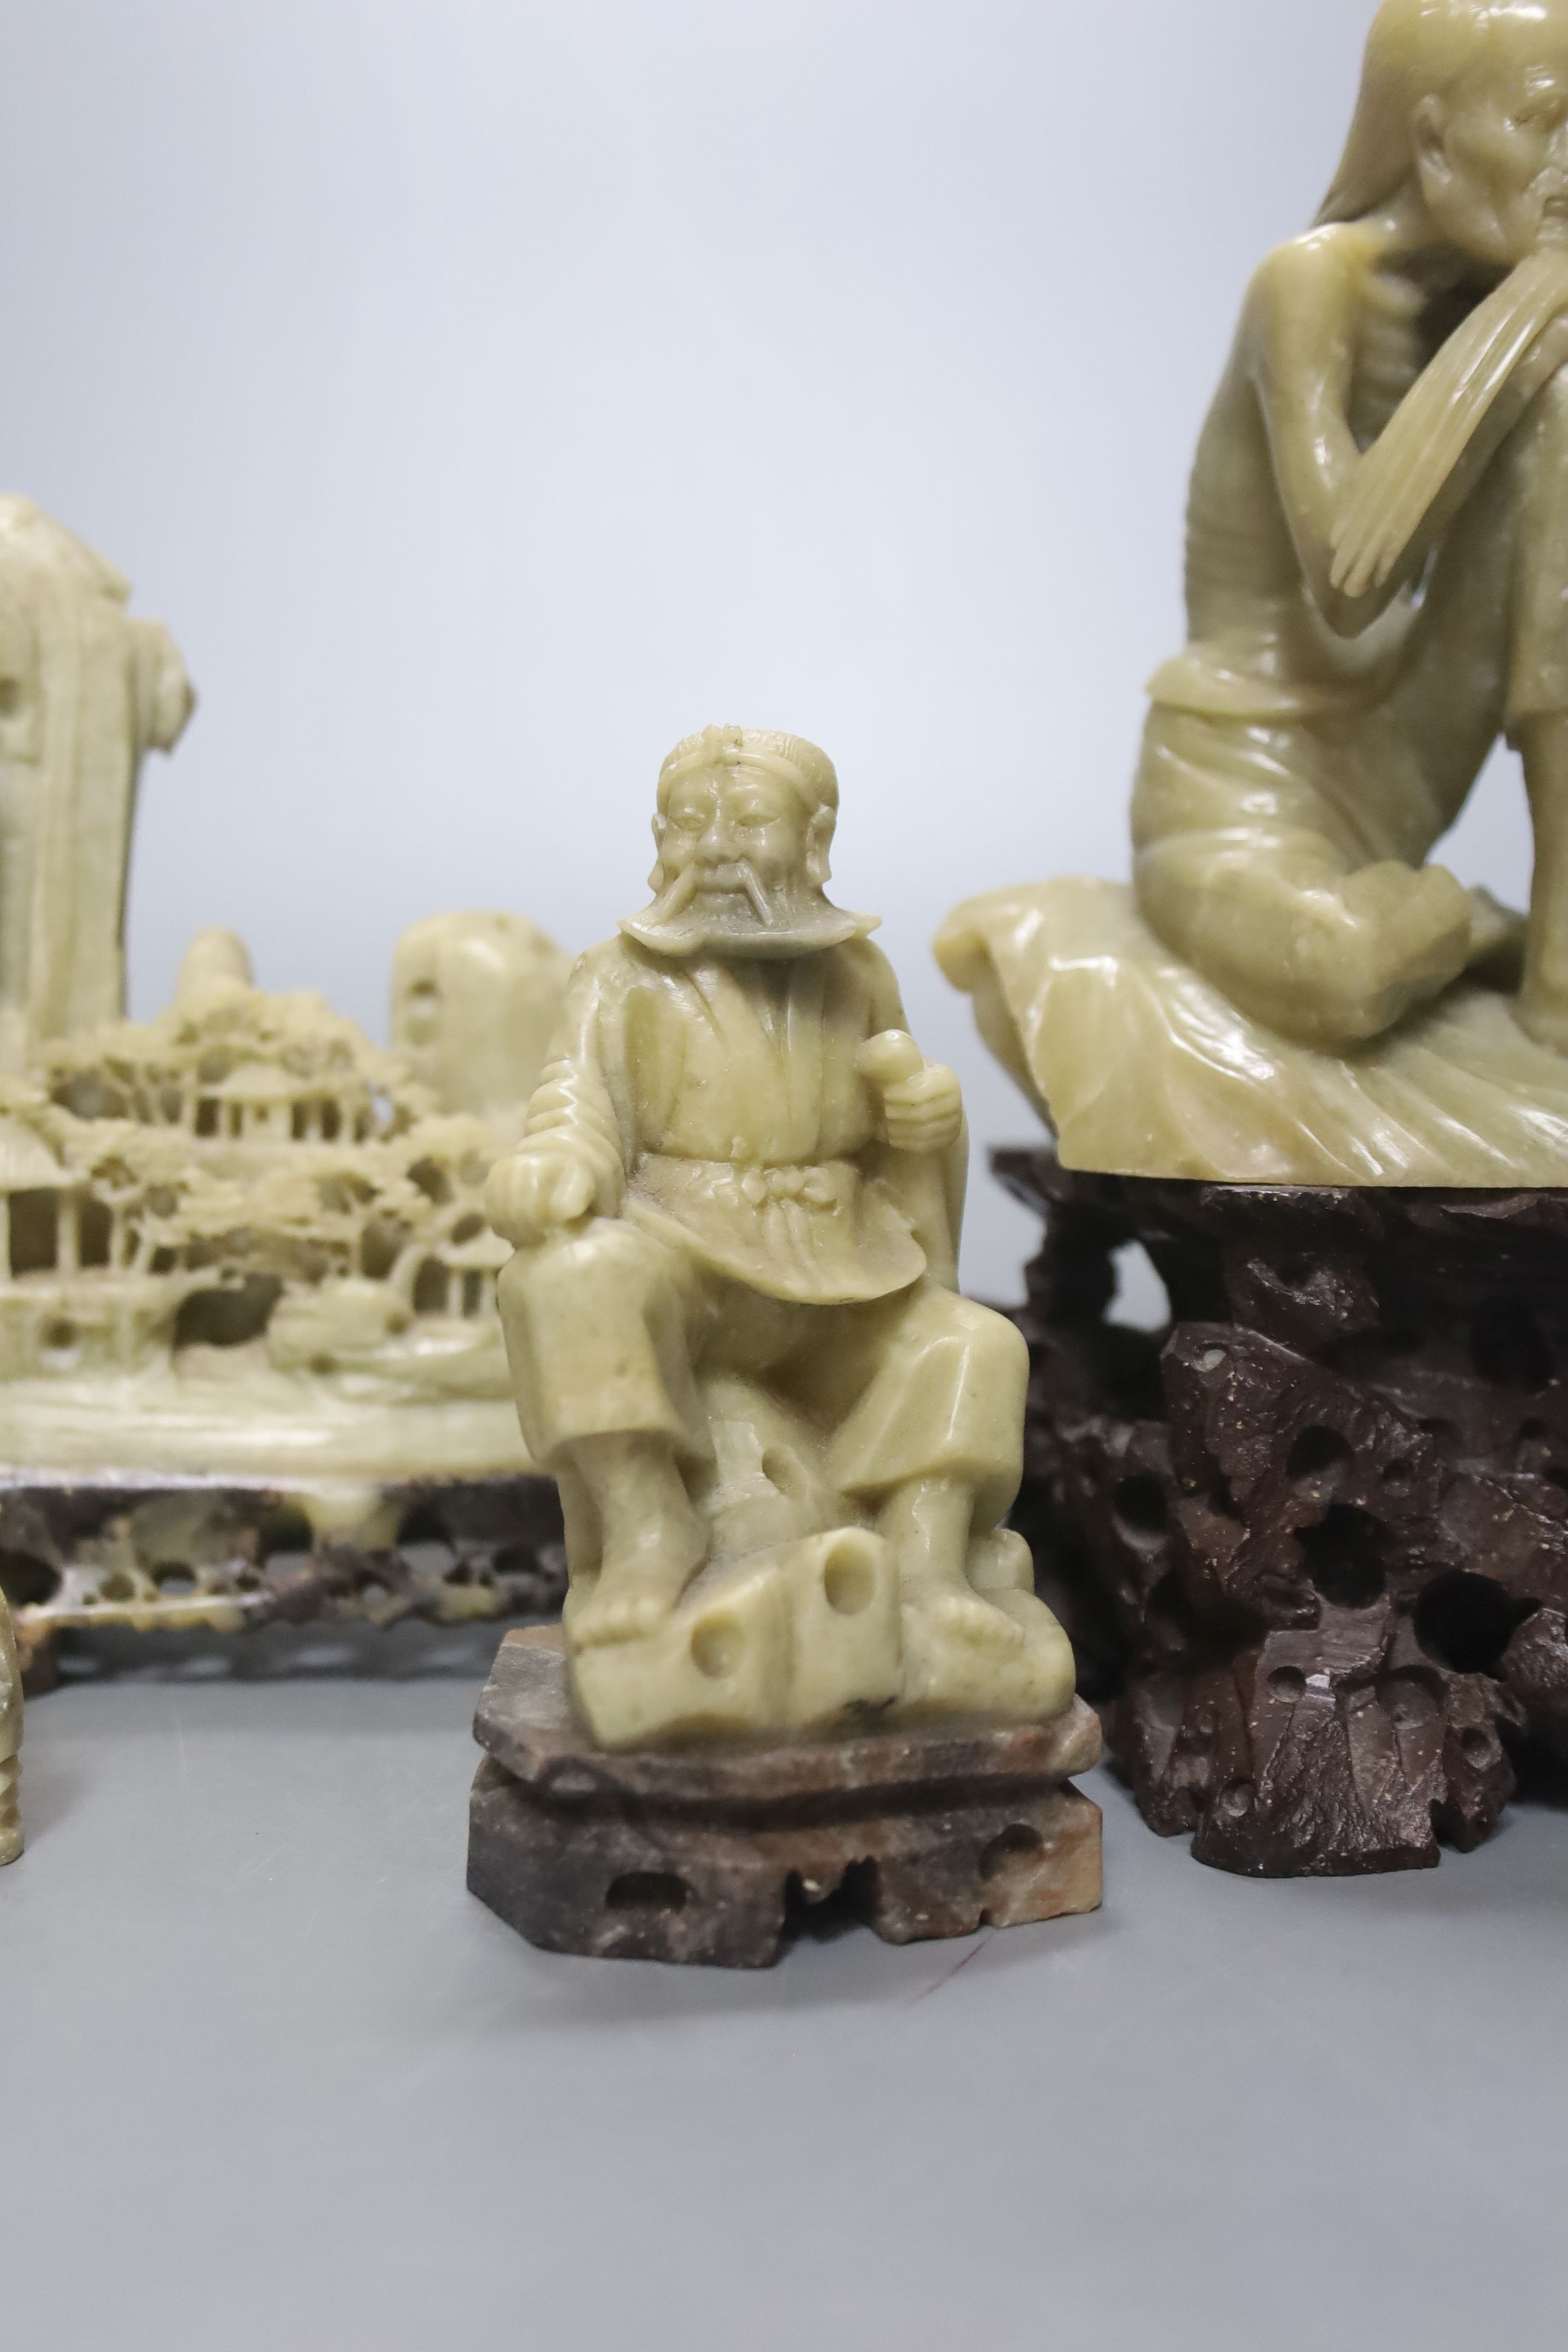 Seven Chinese soapstone carvings, 4 figurative carvings, largest 26 cms high including base.